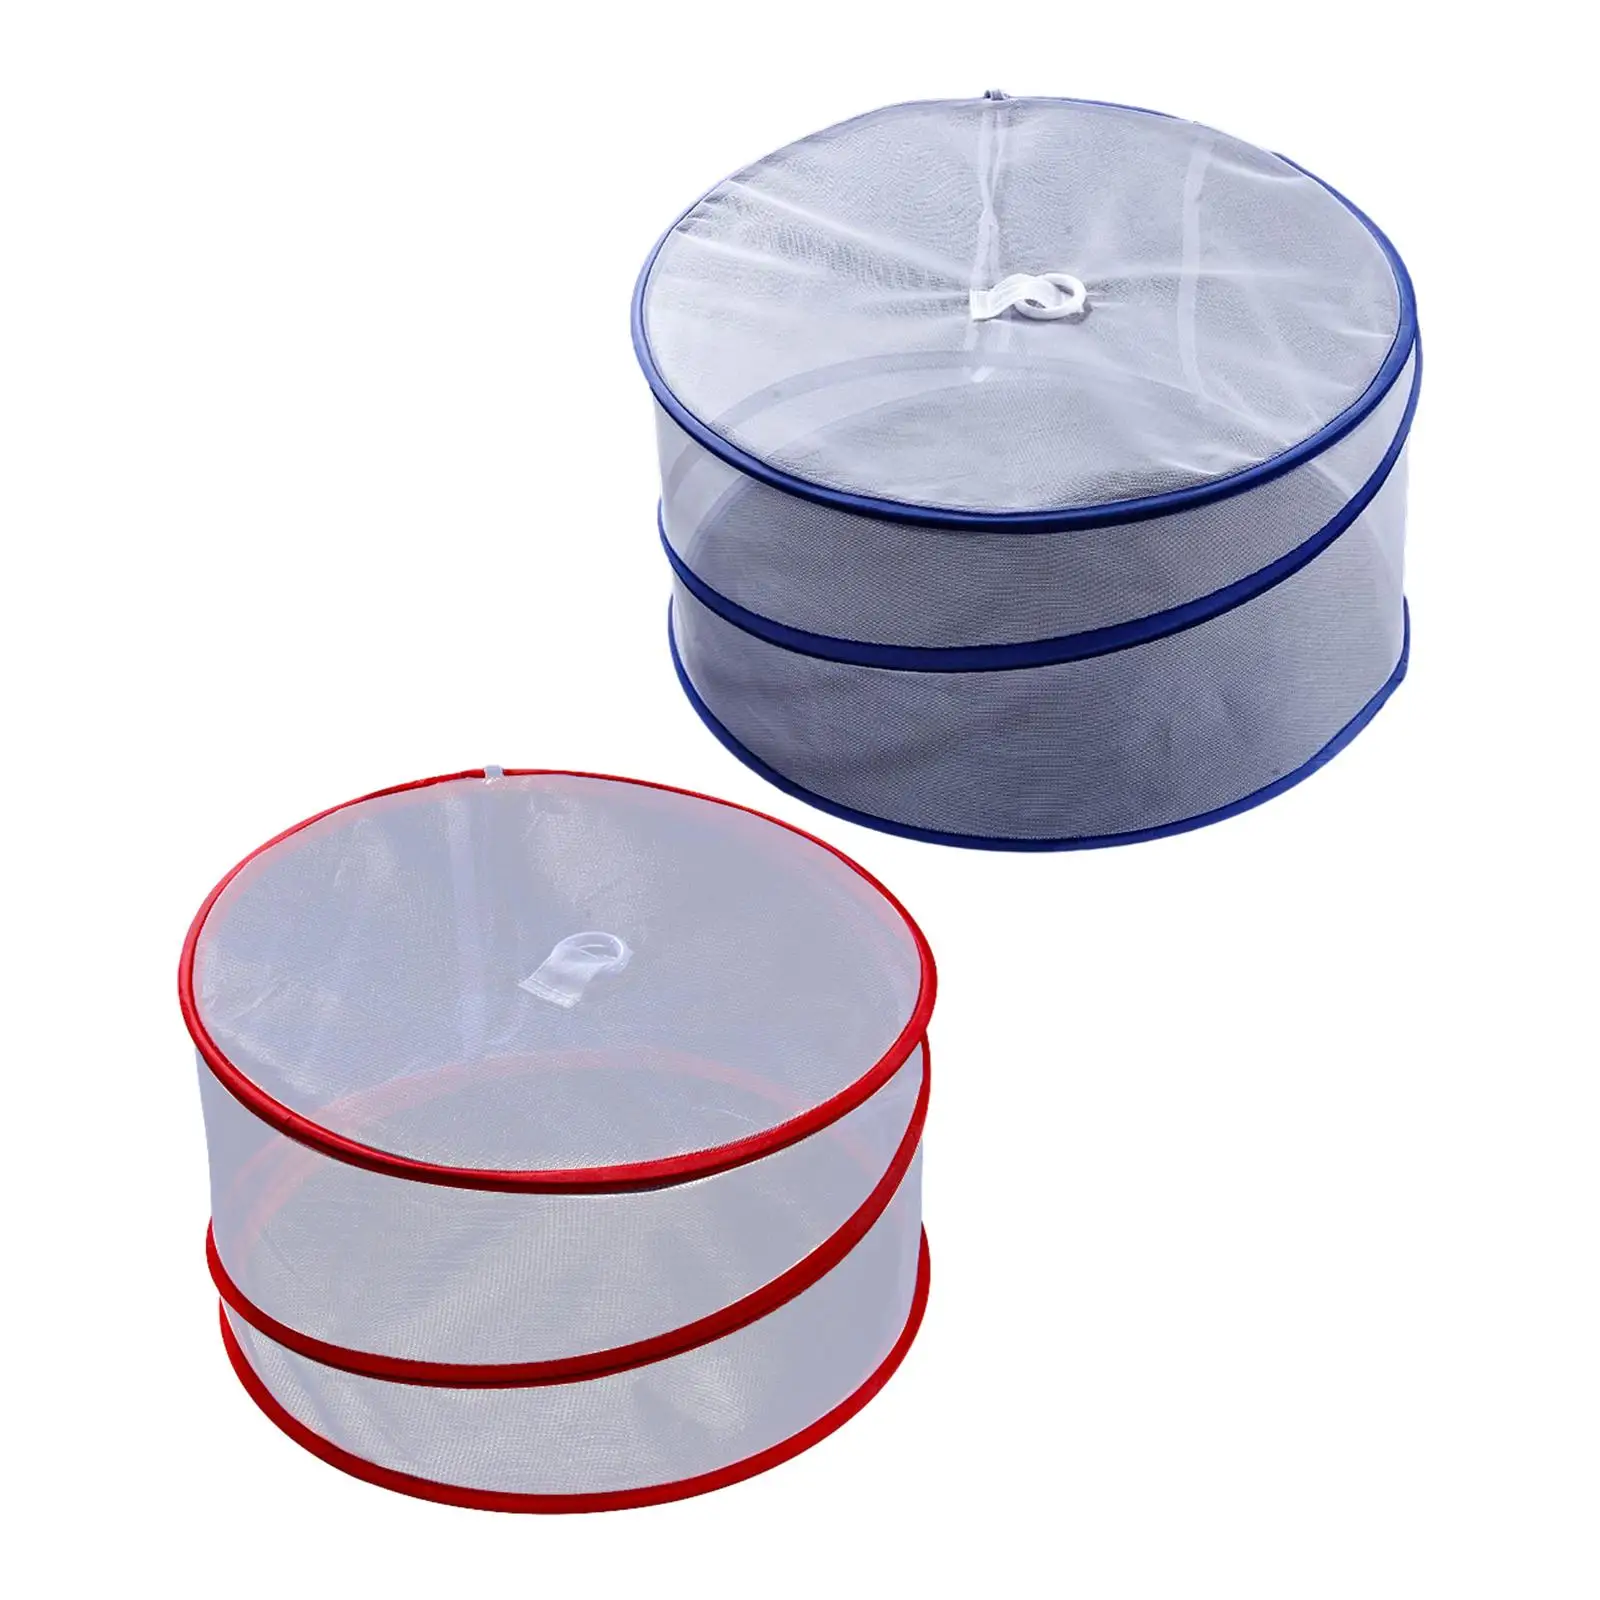 Food Cover Fruit Vegetable Cover Round Food Tents Keeps Fly Away Plate Serving Covers for BBQ Parties Cooking Hiking Trays